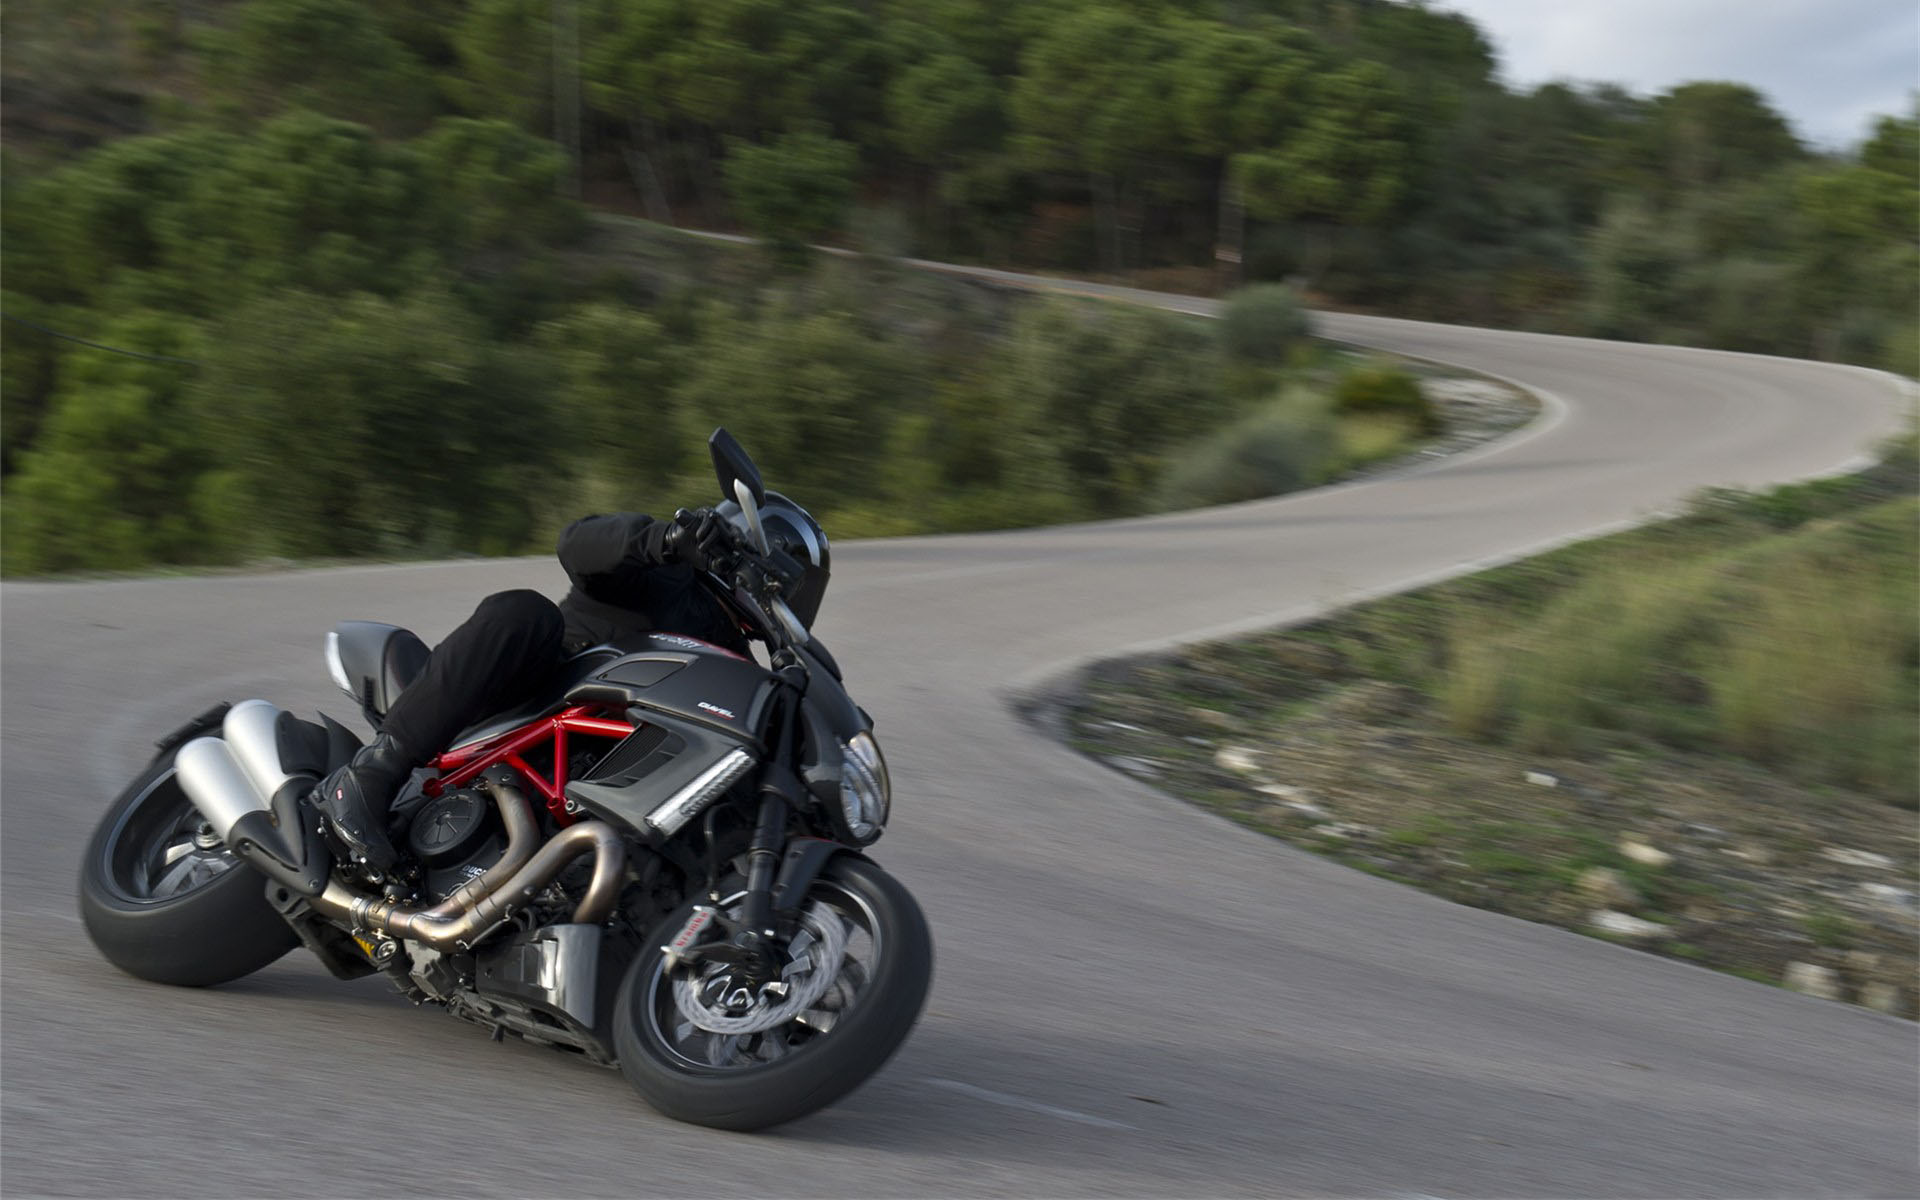 Ducati Diavel Free Desktop Wallpapers for HD Widescreen and Mobile